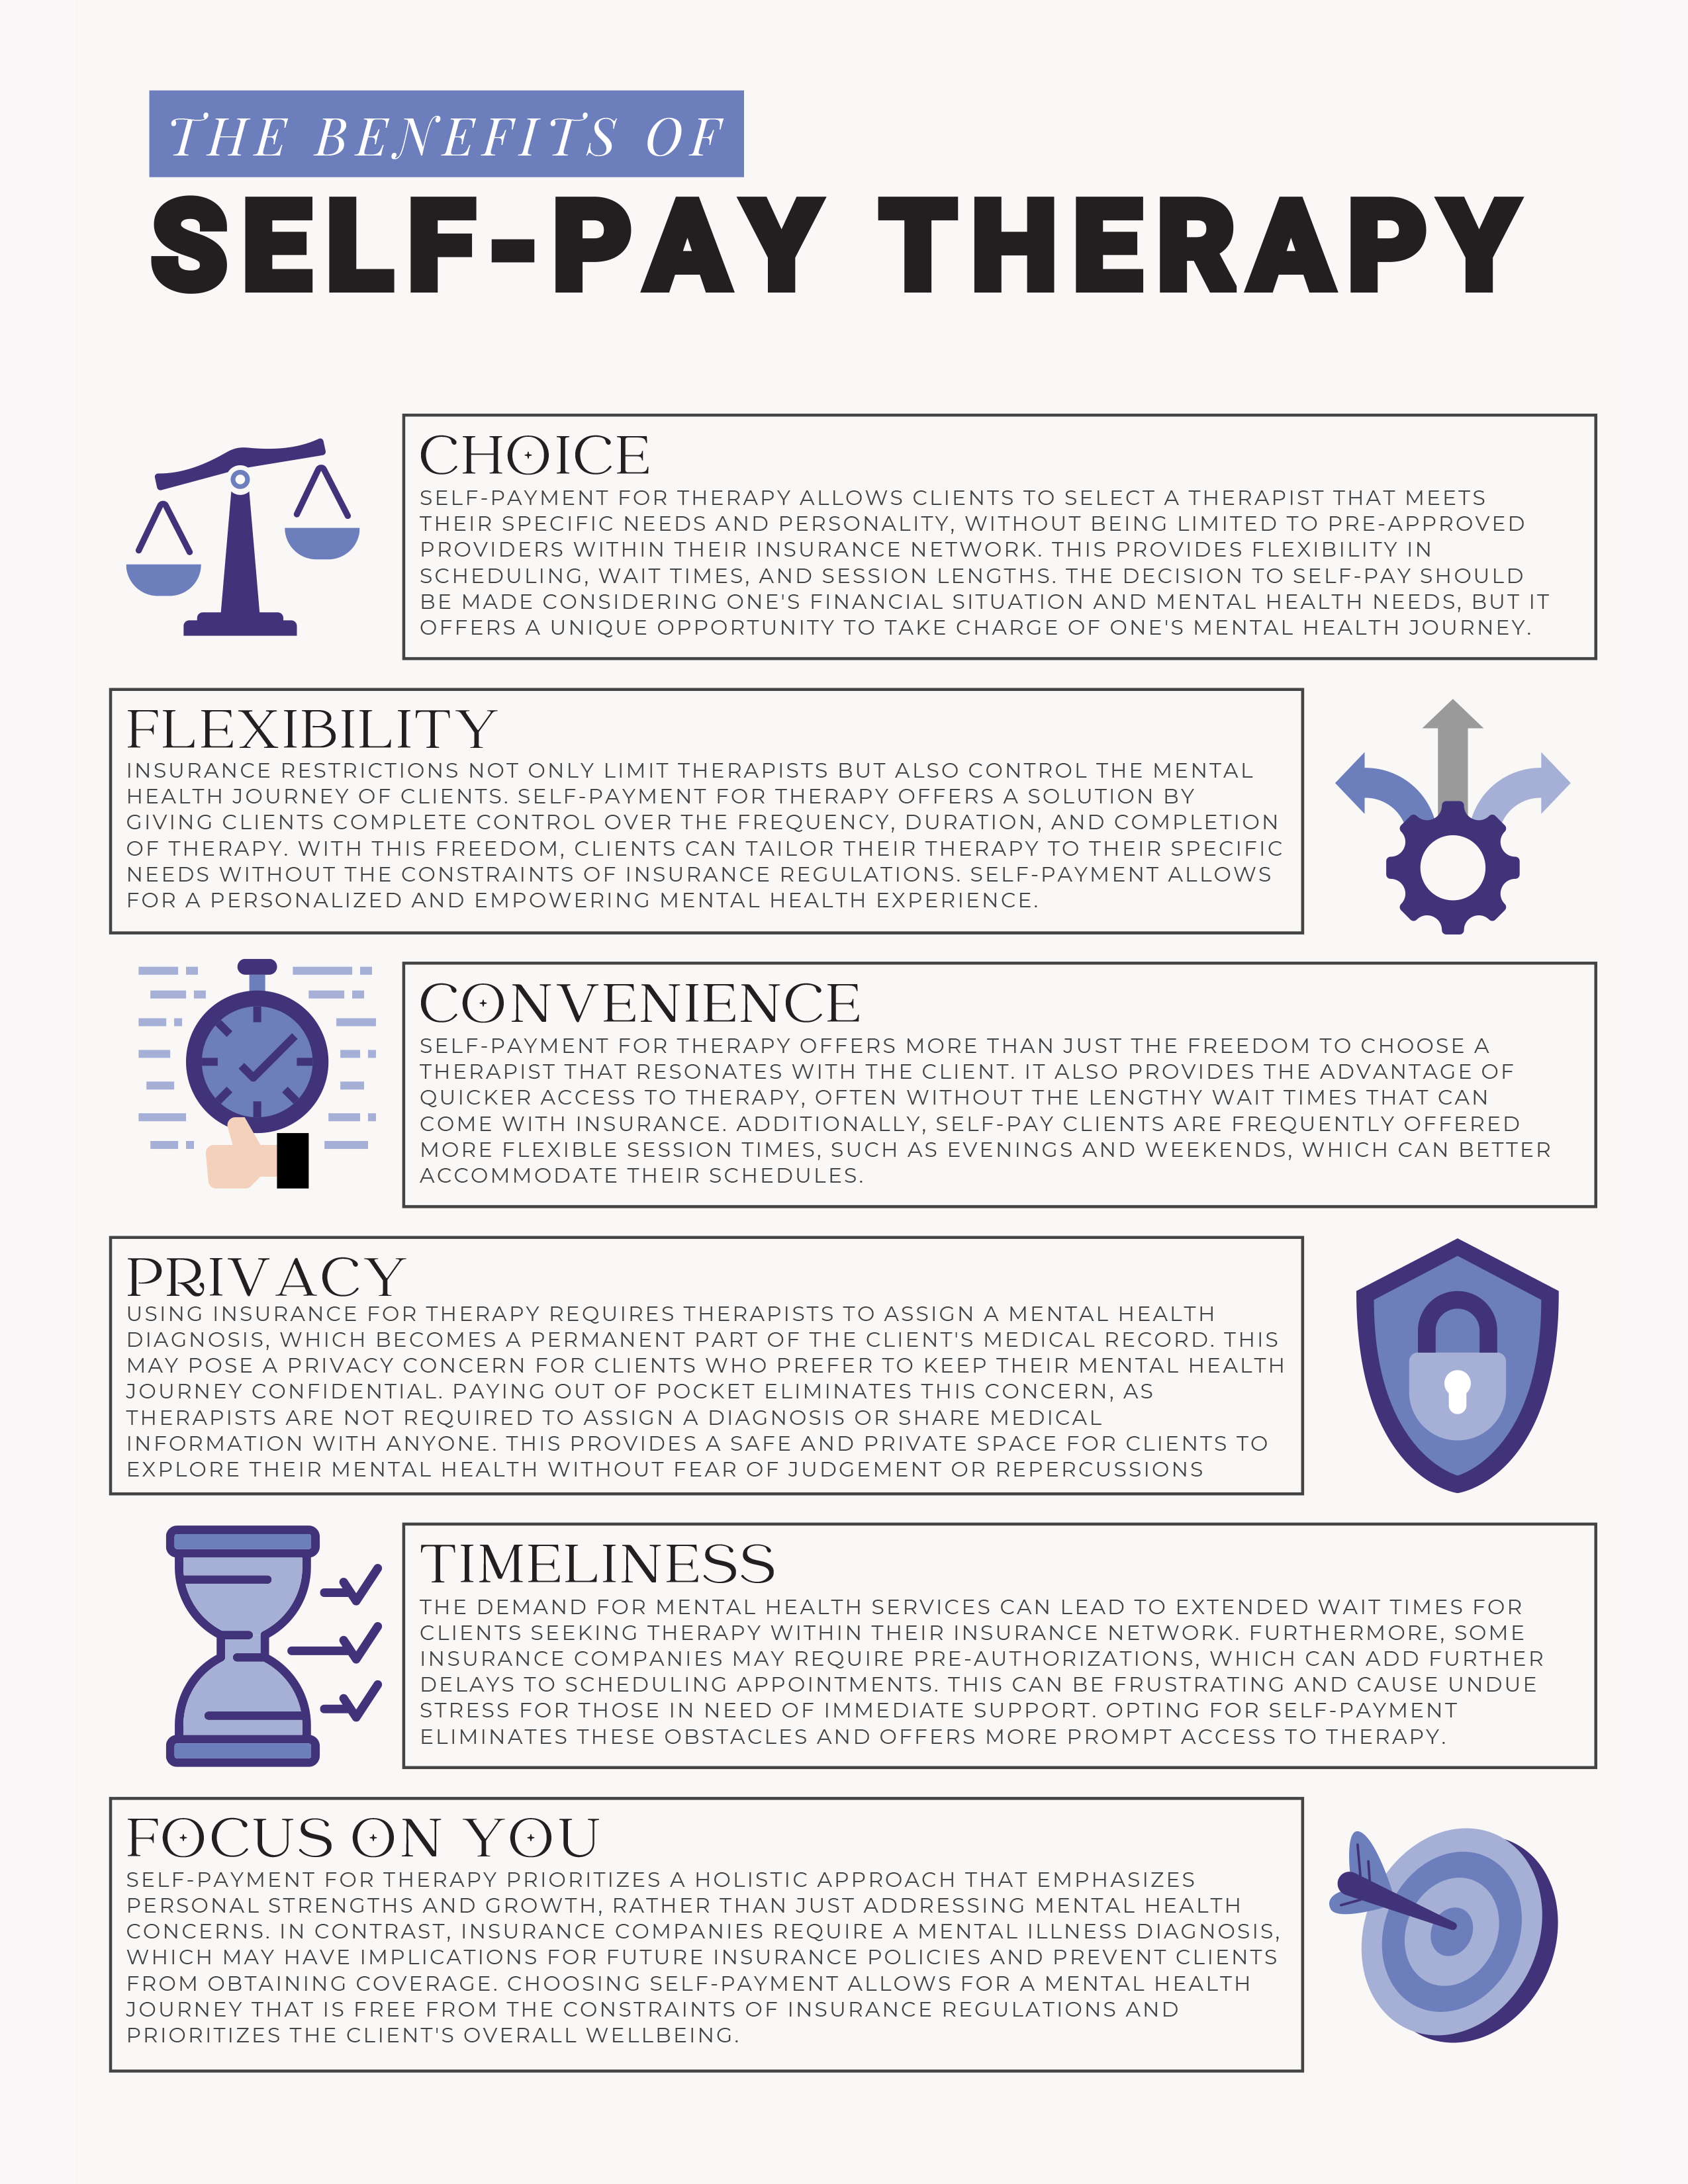 Self-Pay Therapy